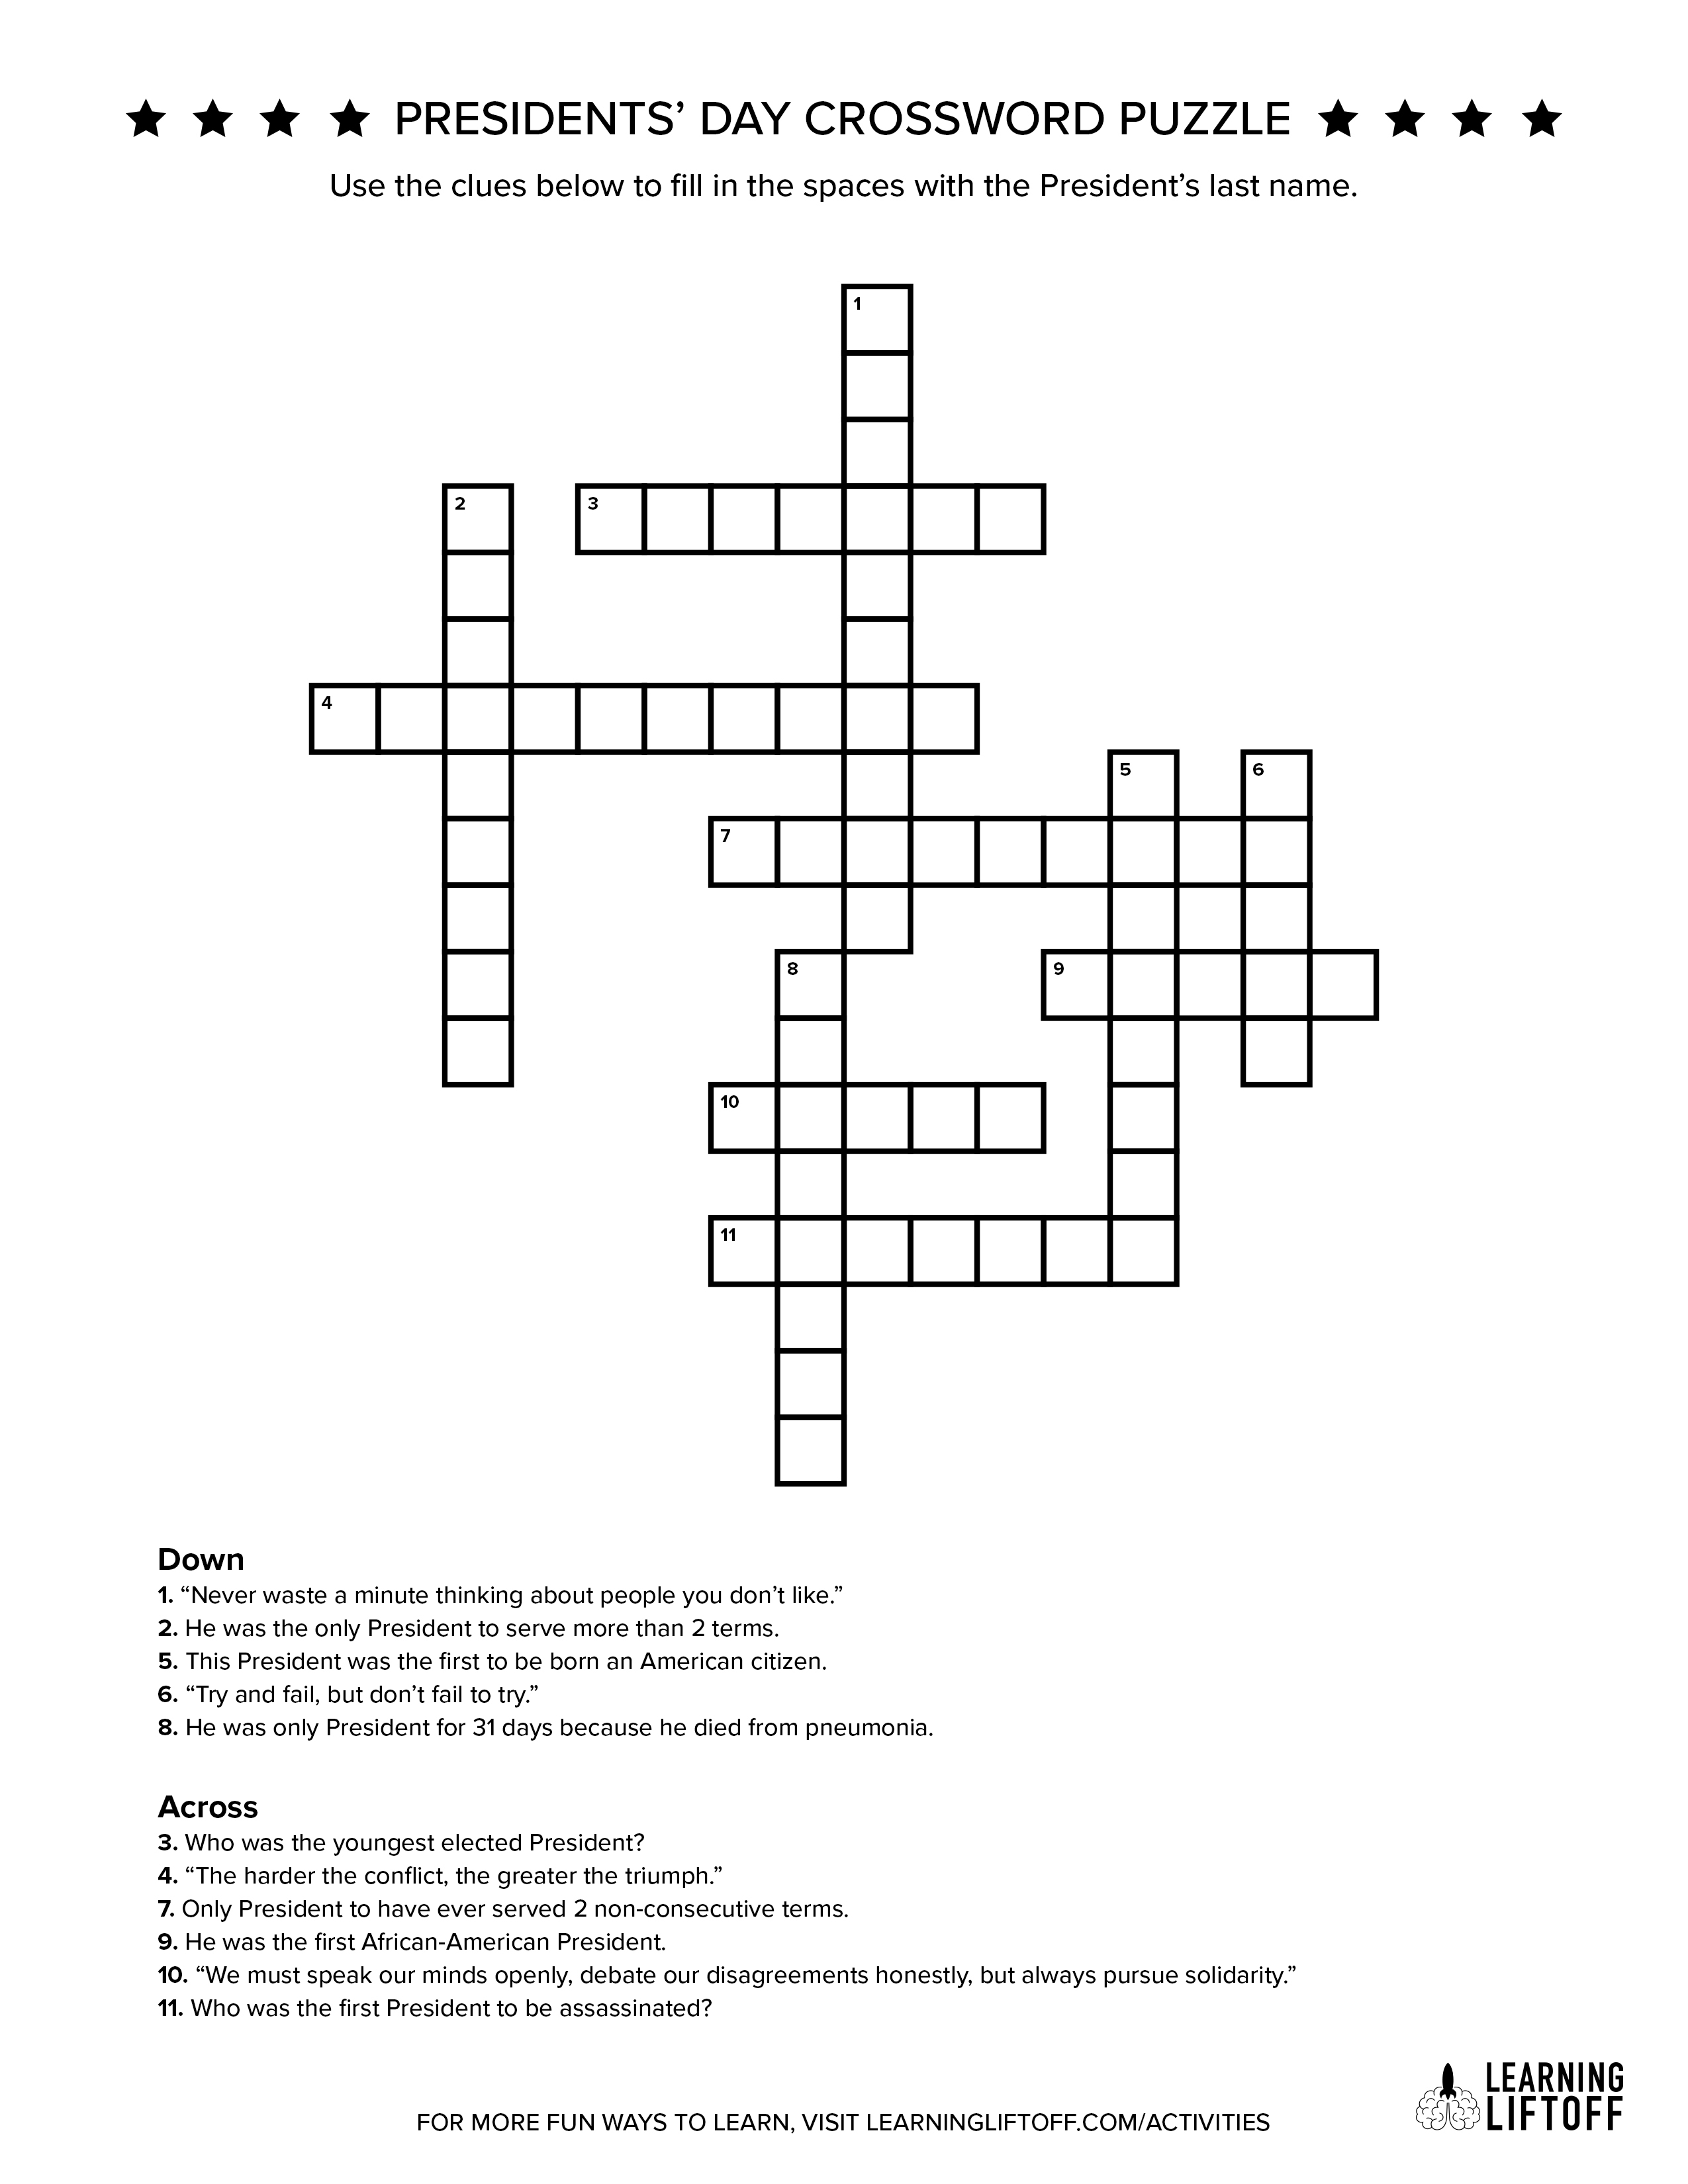 How Much Do You Know About Our U.s. Presidents? - Learning Liftoff - Us Presidents Crossword Puzzle Printable